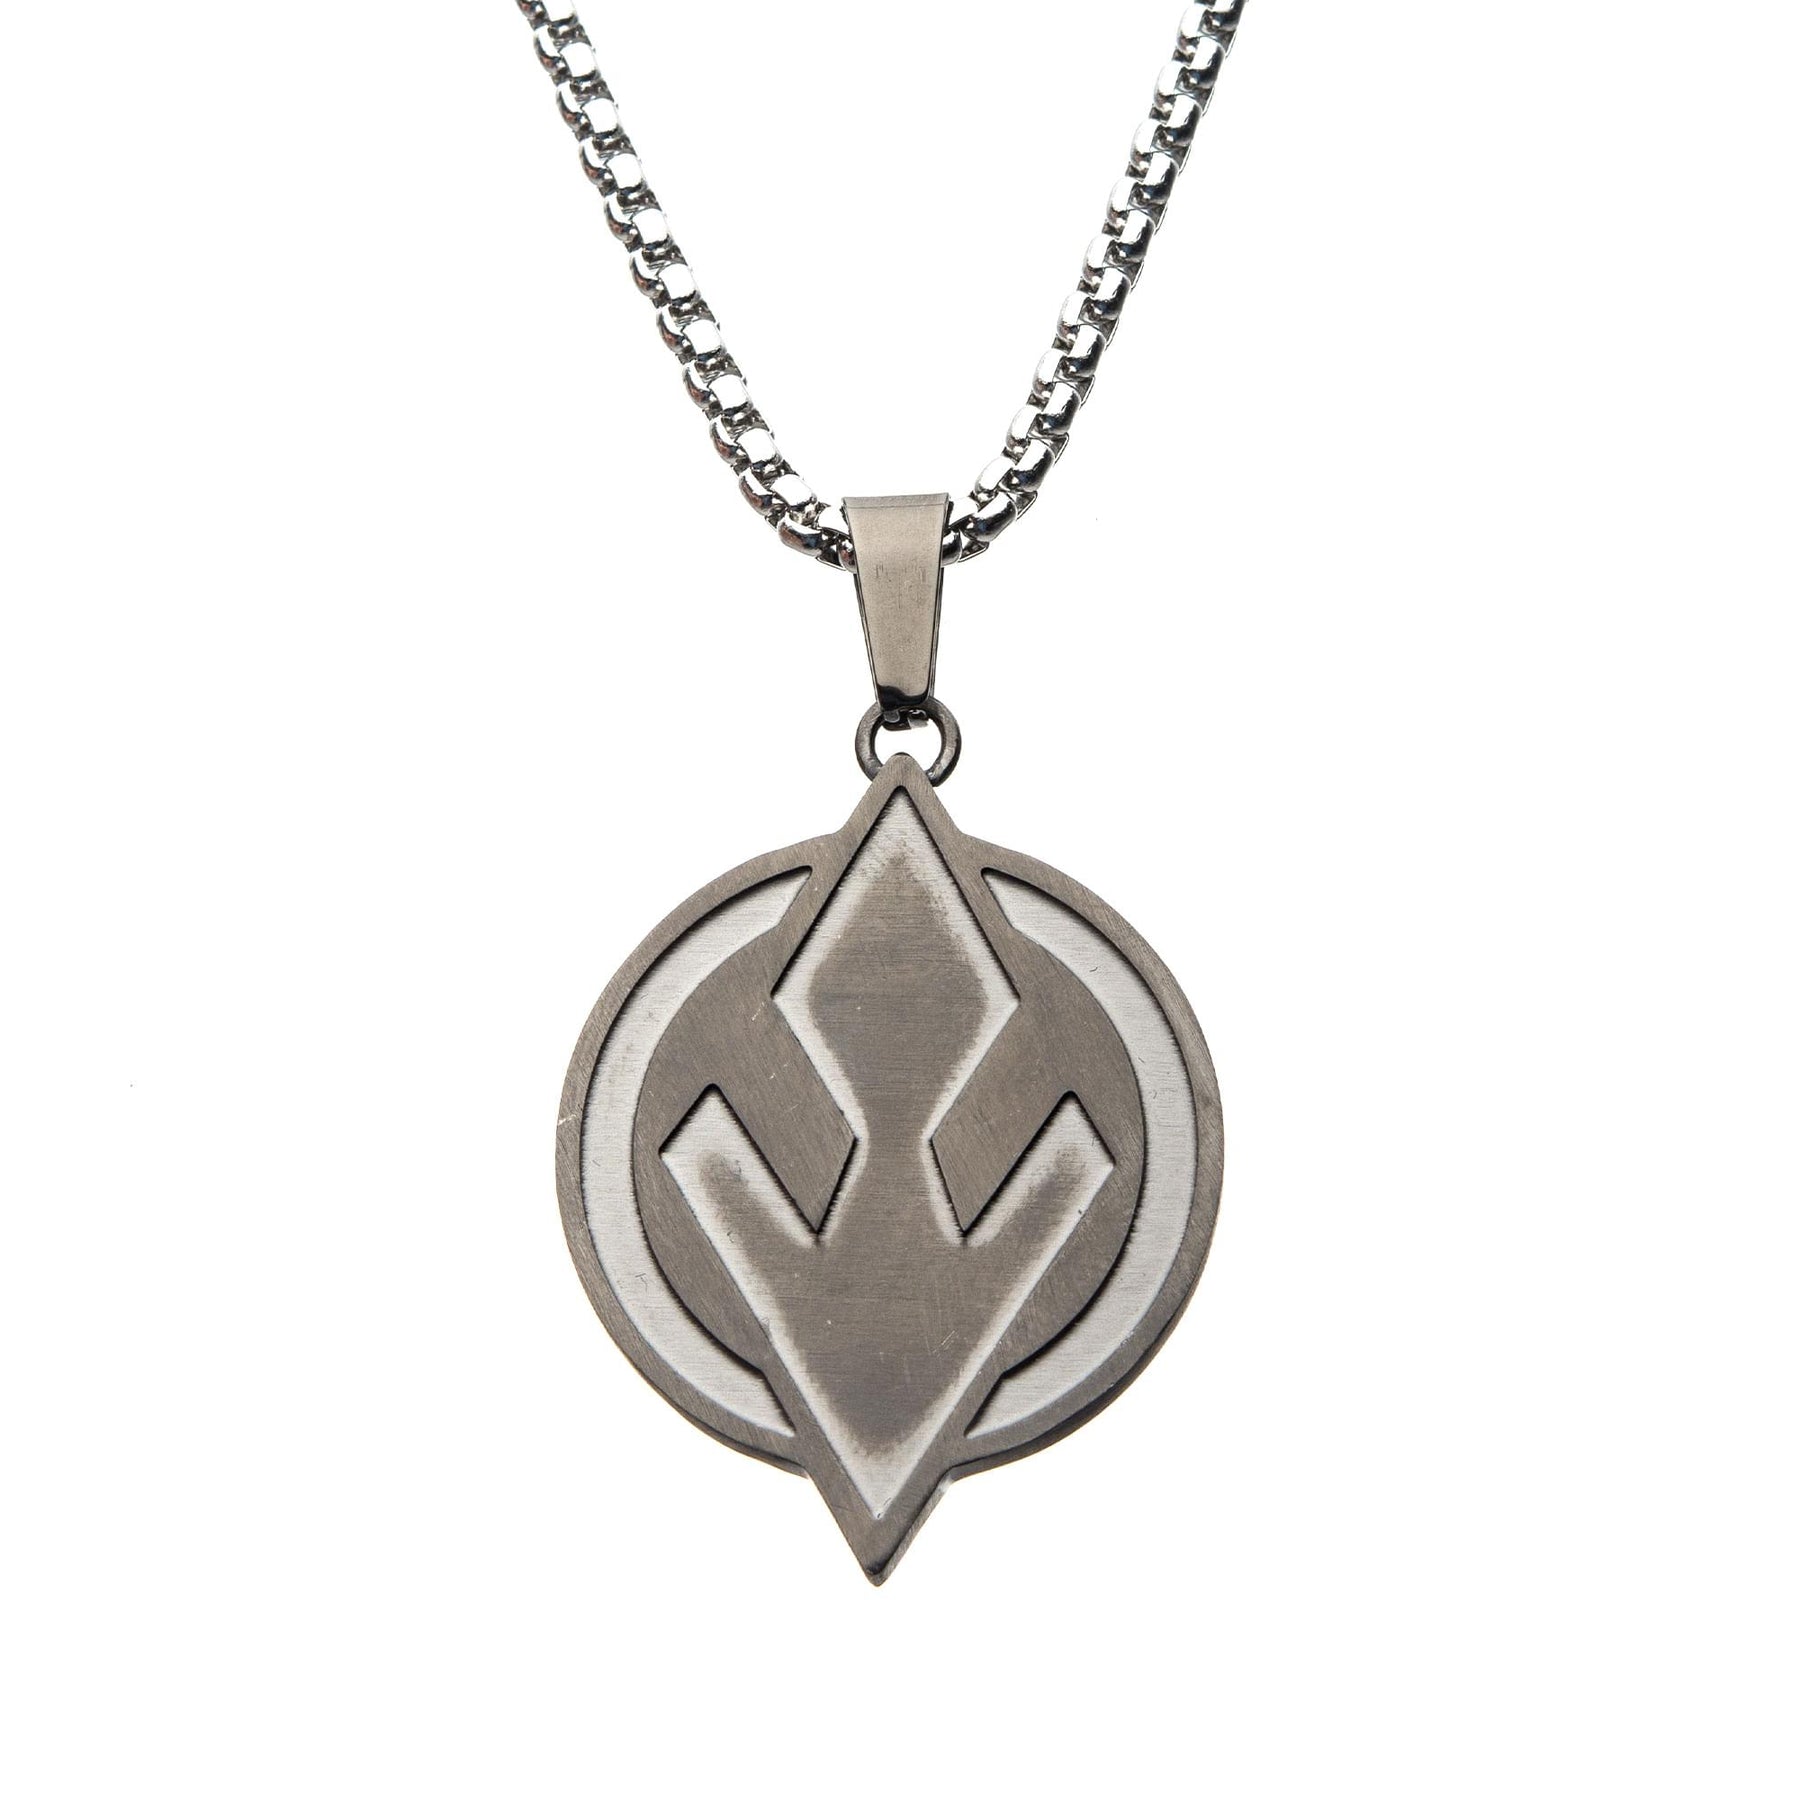 Star Wars Sith Symbol Stainless Steel Pendant Necklace